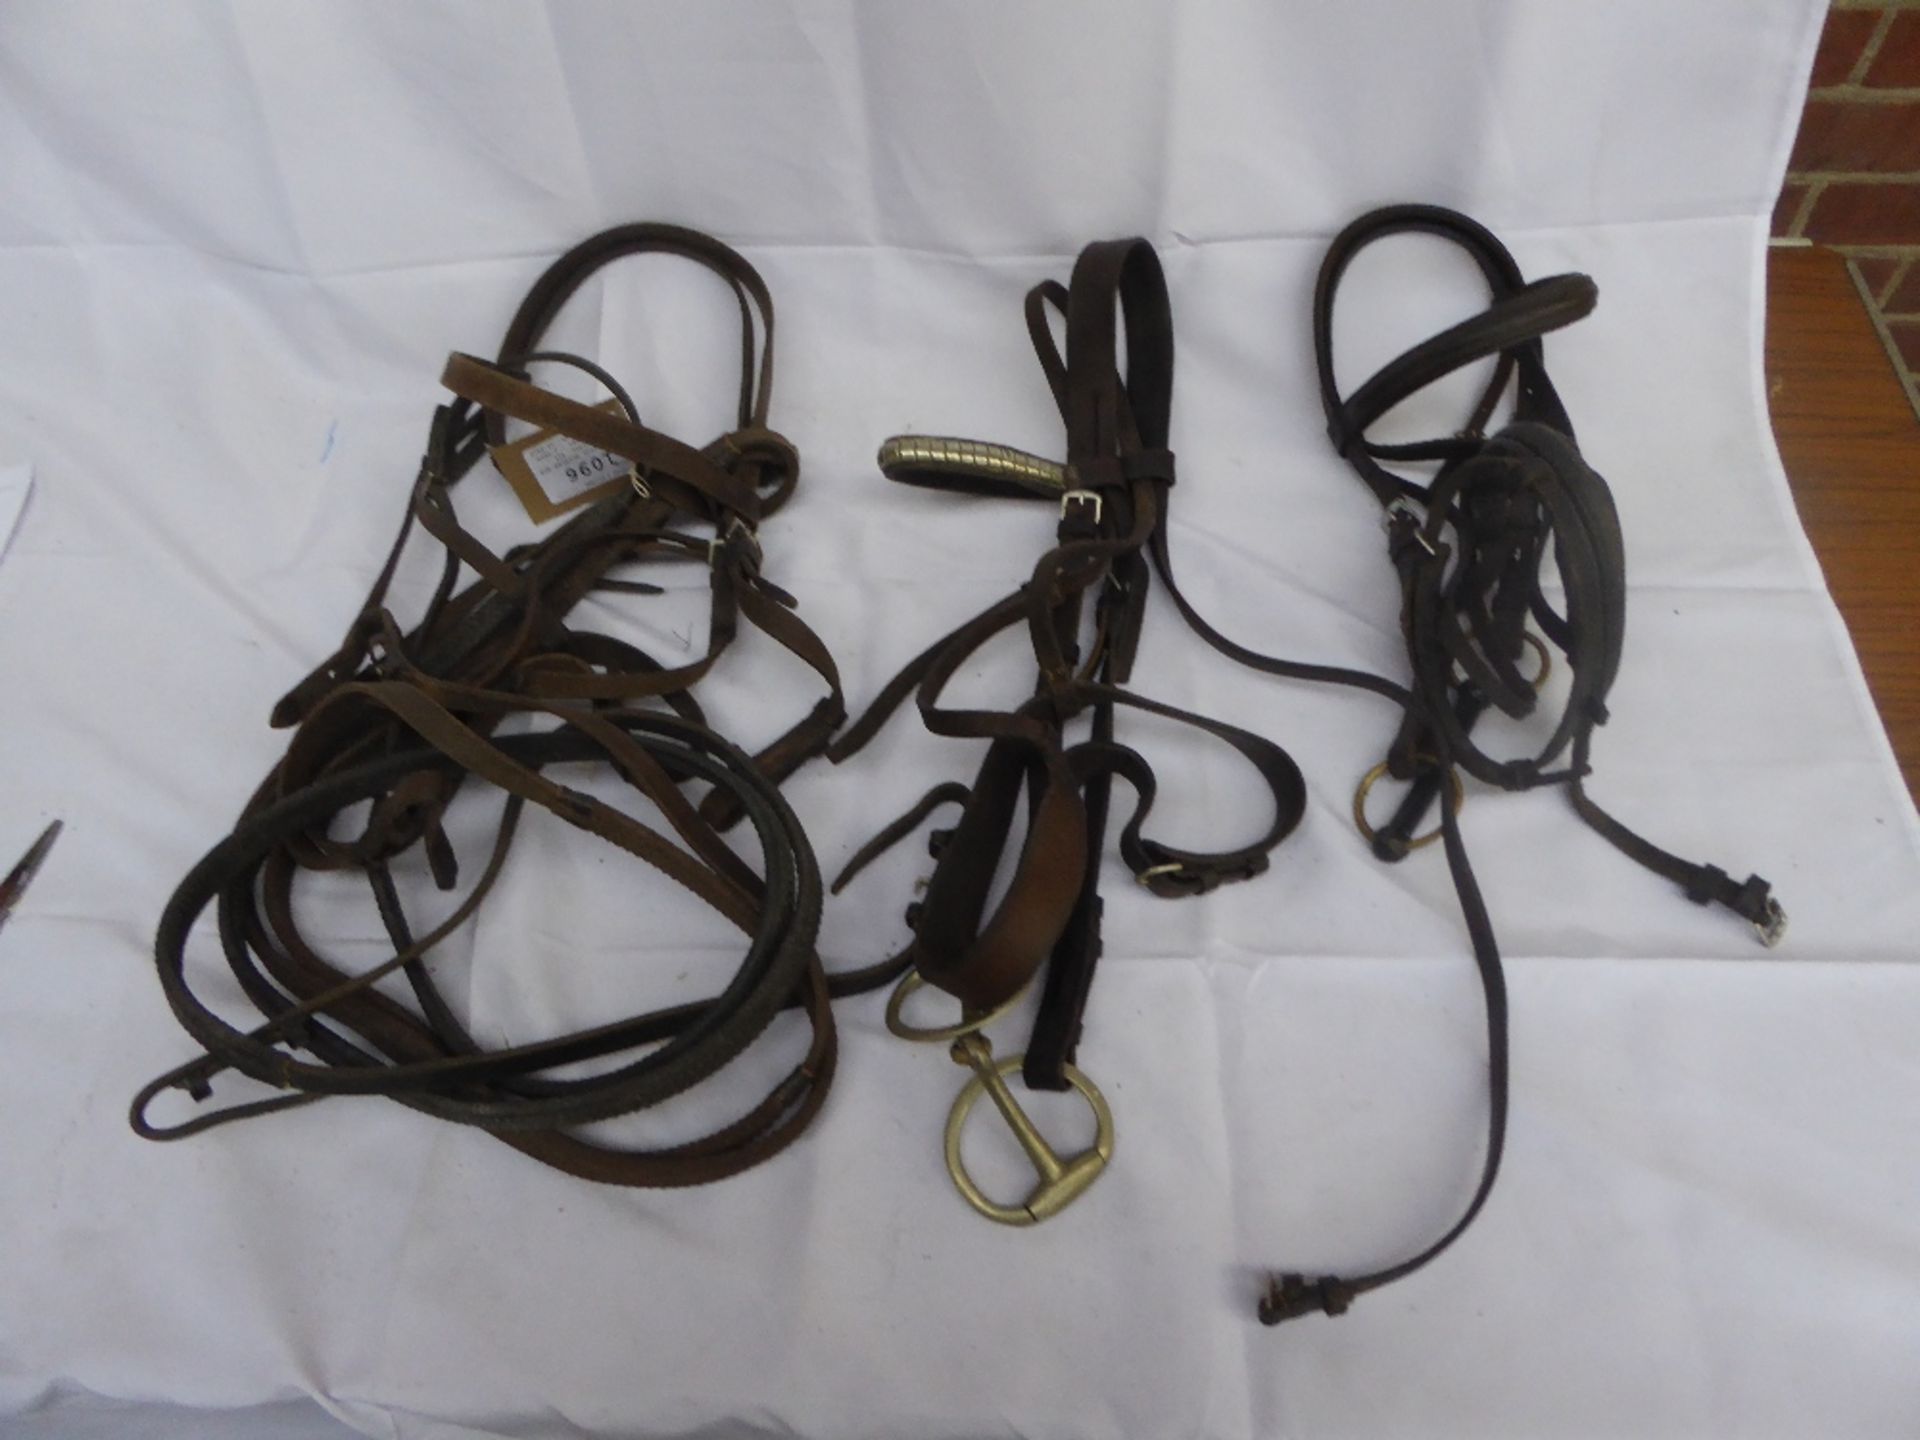 2 cob/horse bridles and 1 pony bridle, all brown leather - 2 with bits and reins; in fair condition